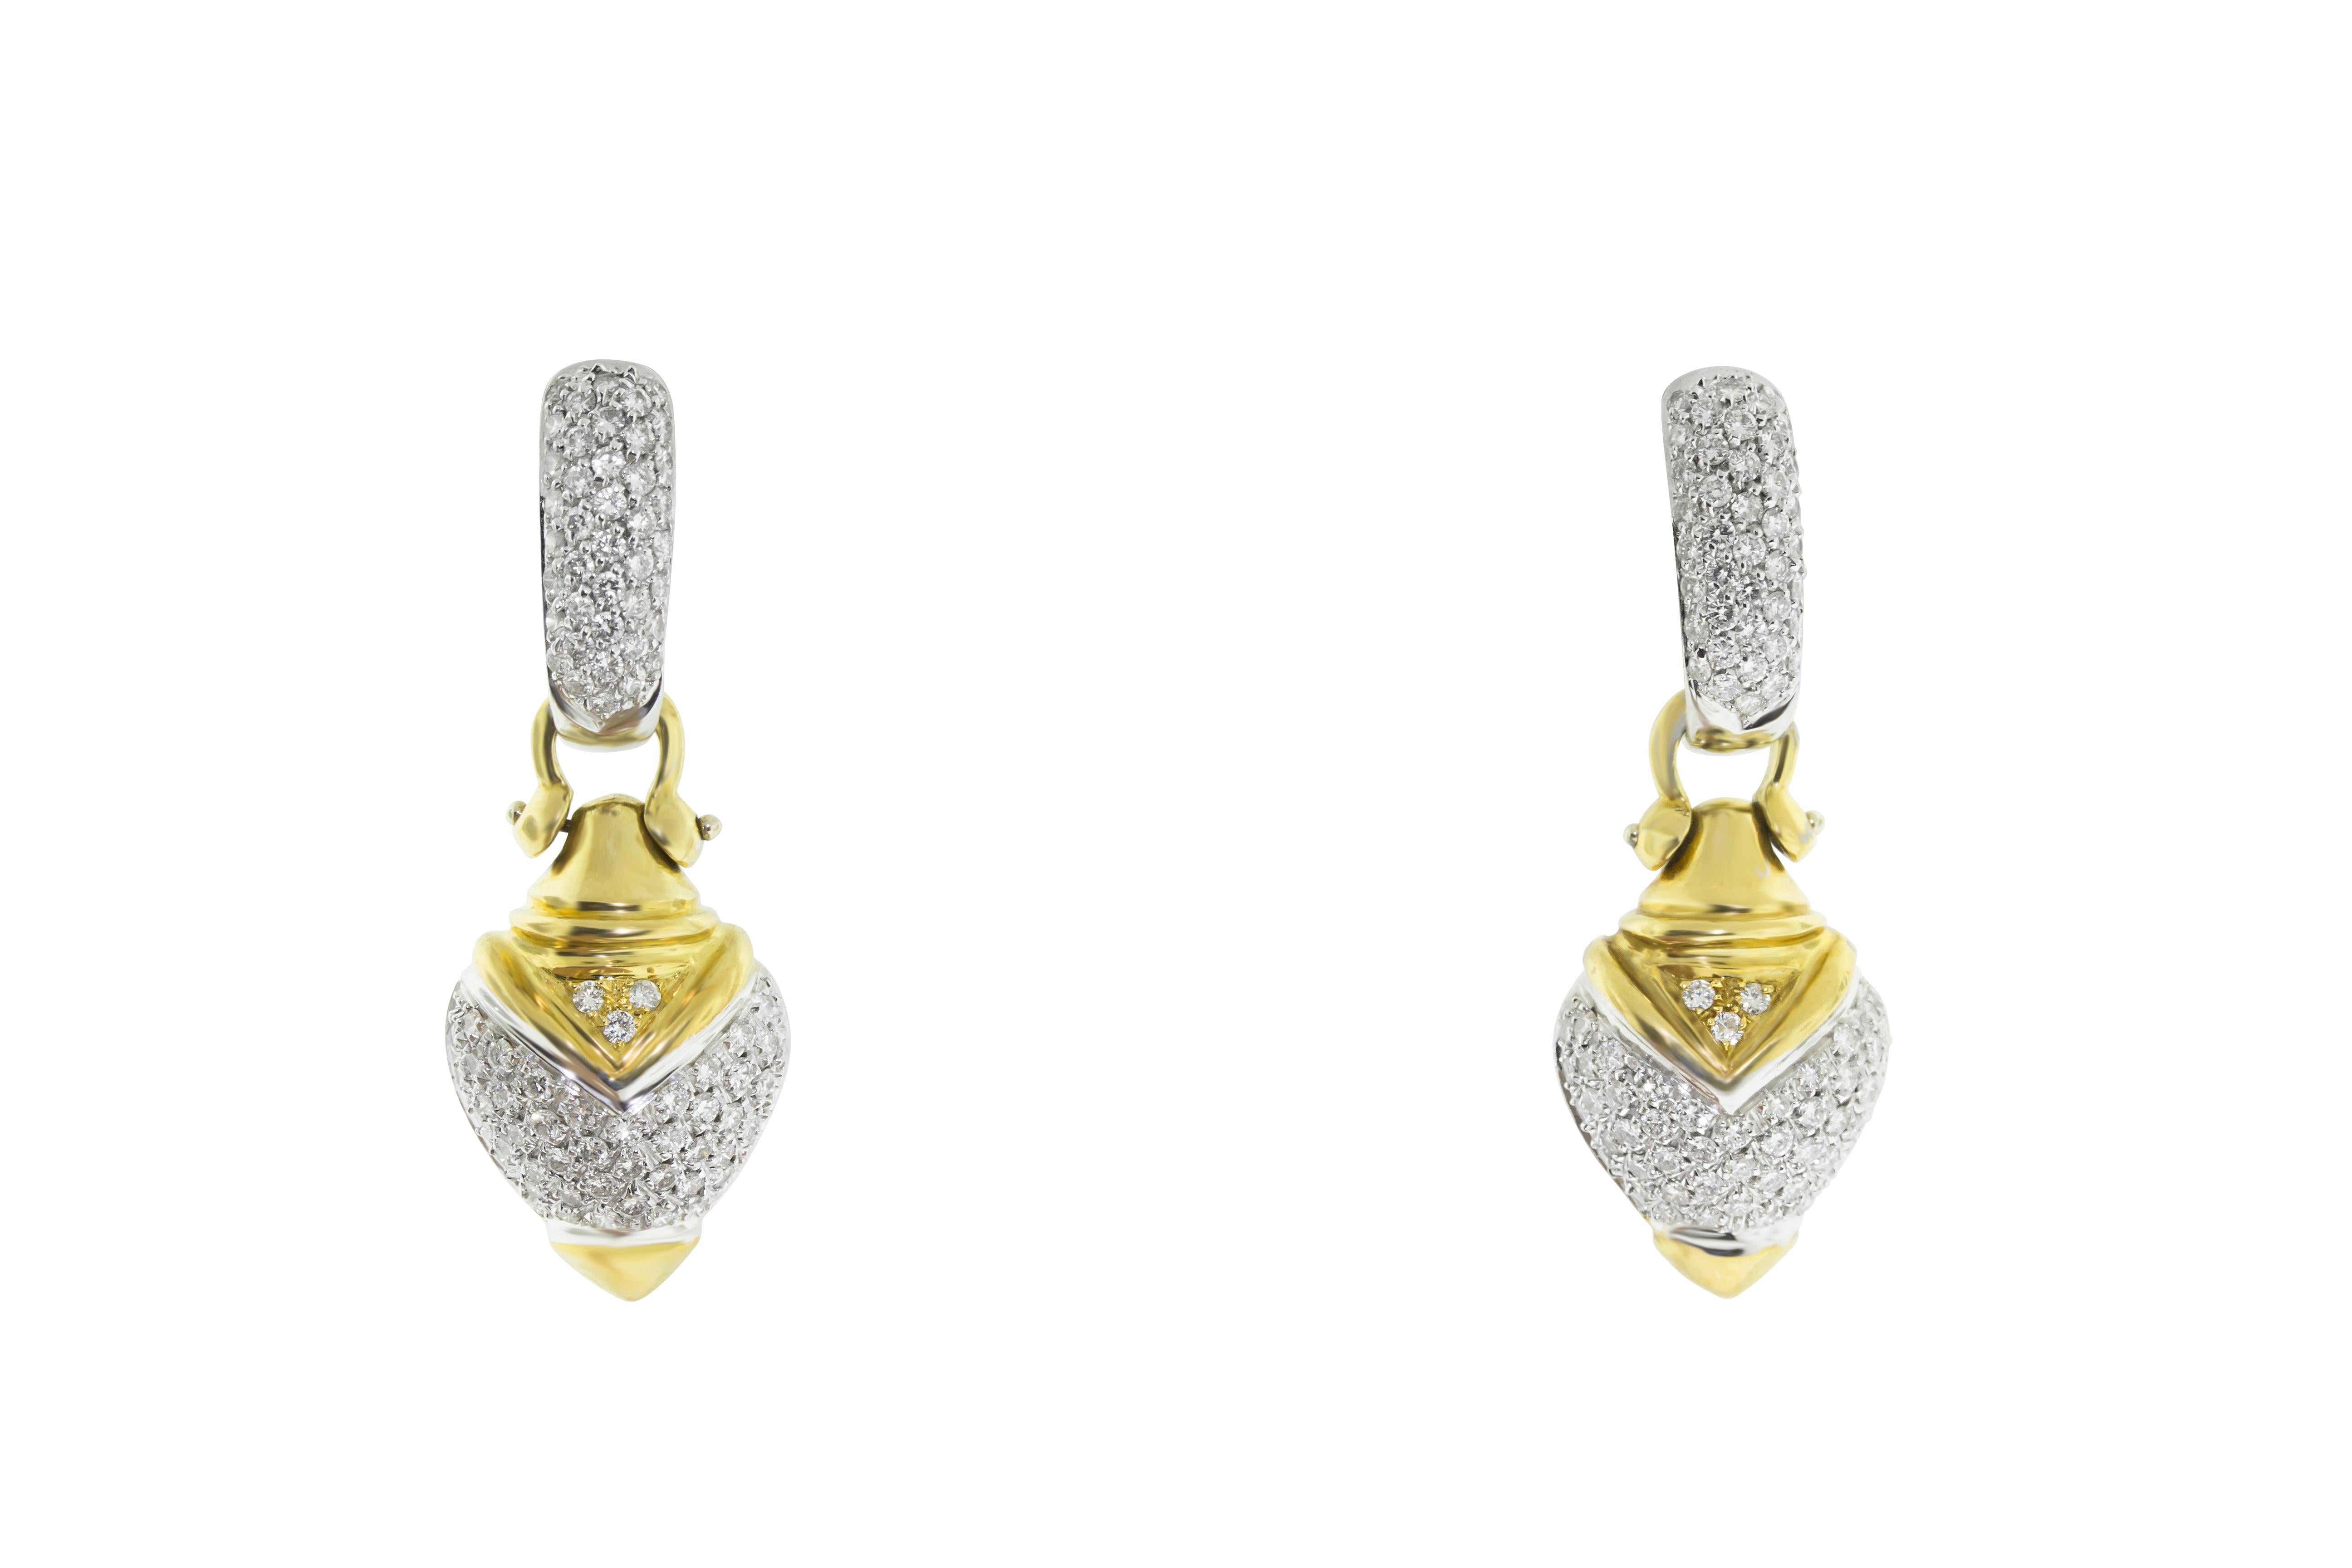 These earrings set in 18K yellow and white gold feature a diamond pave huggie hoop earring with a removable heart charm. 5.04 carats of pave G-H VS diamonds and 17g of 18K yellow and white gold. Made in Italy.  

Viewings available in our NYC